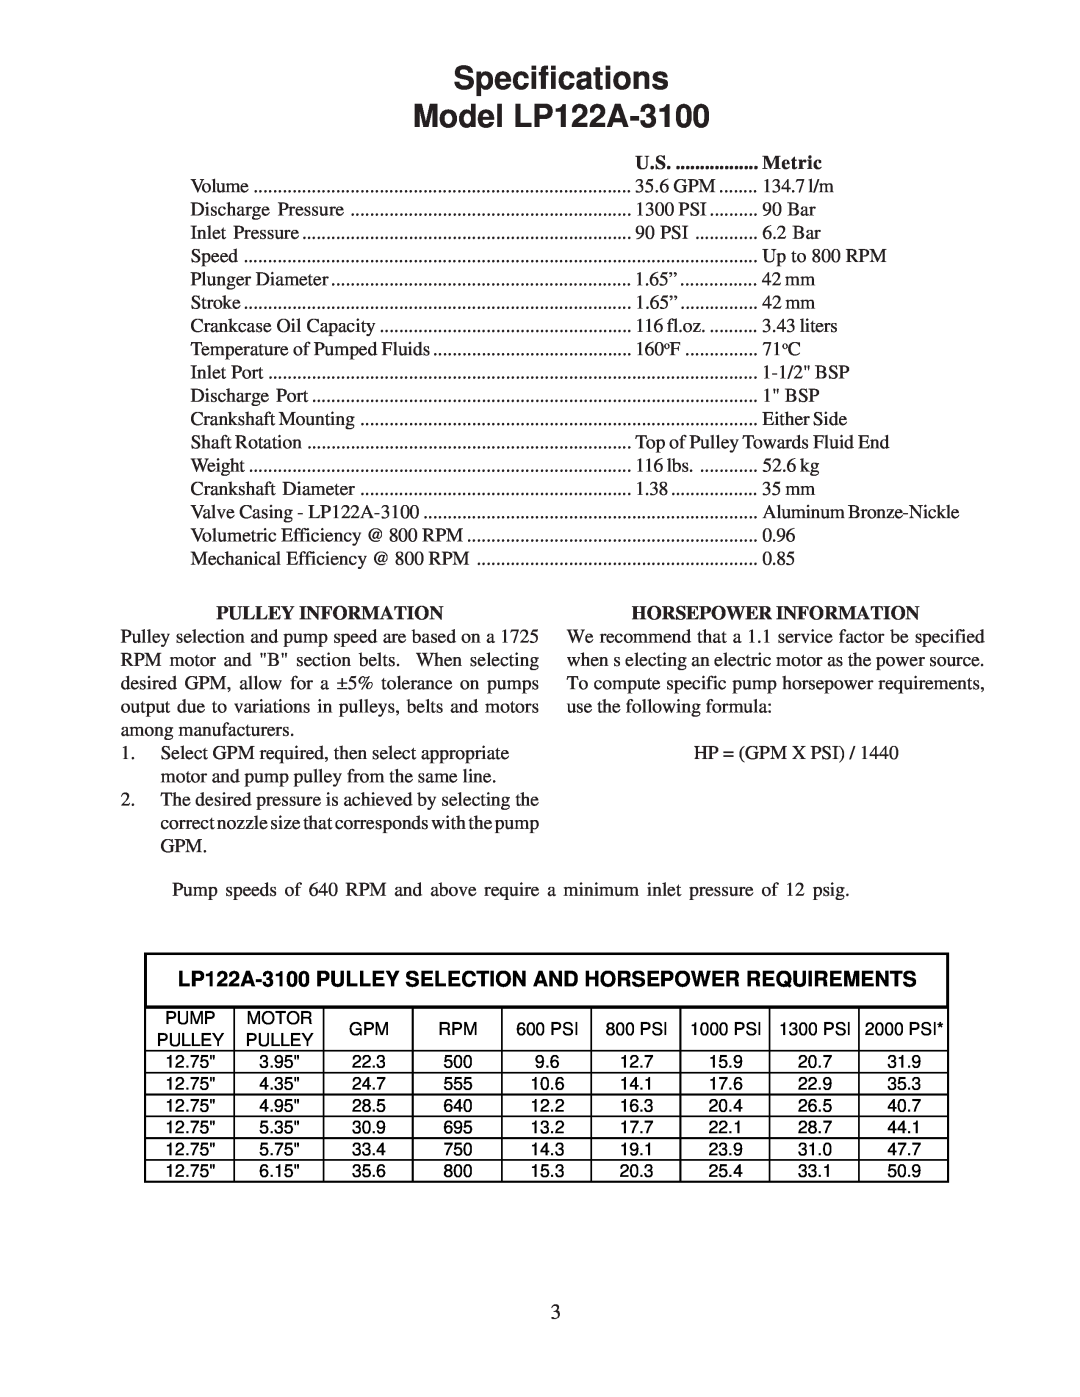 Giant Specifications Model LP122A-3100, LP122A-3100 PULLEY SELECTION AND HORSEPOWER REQUIREMENTS, Metric 